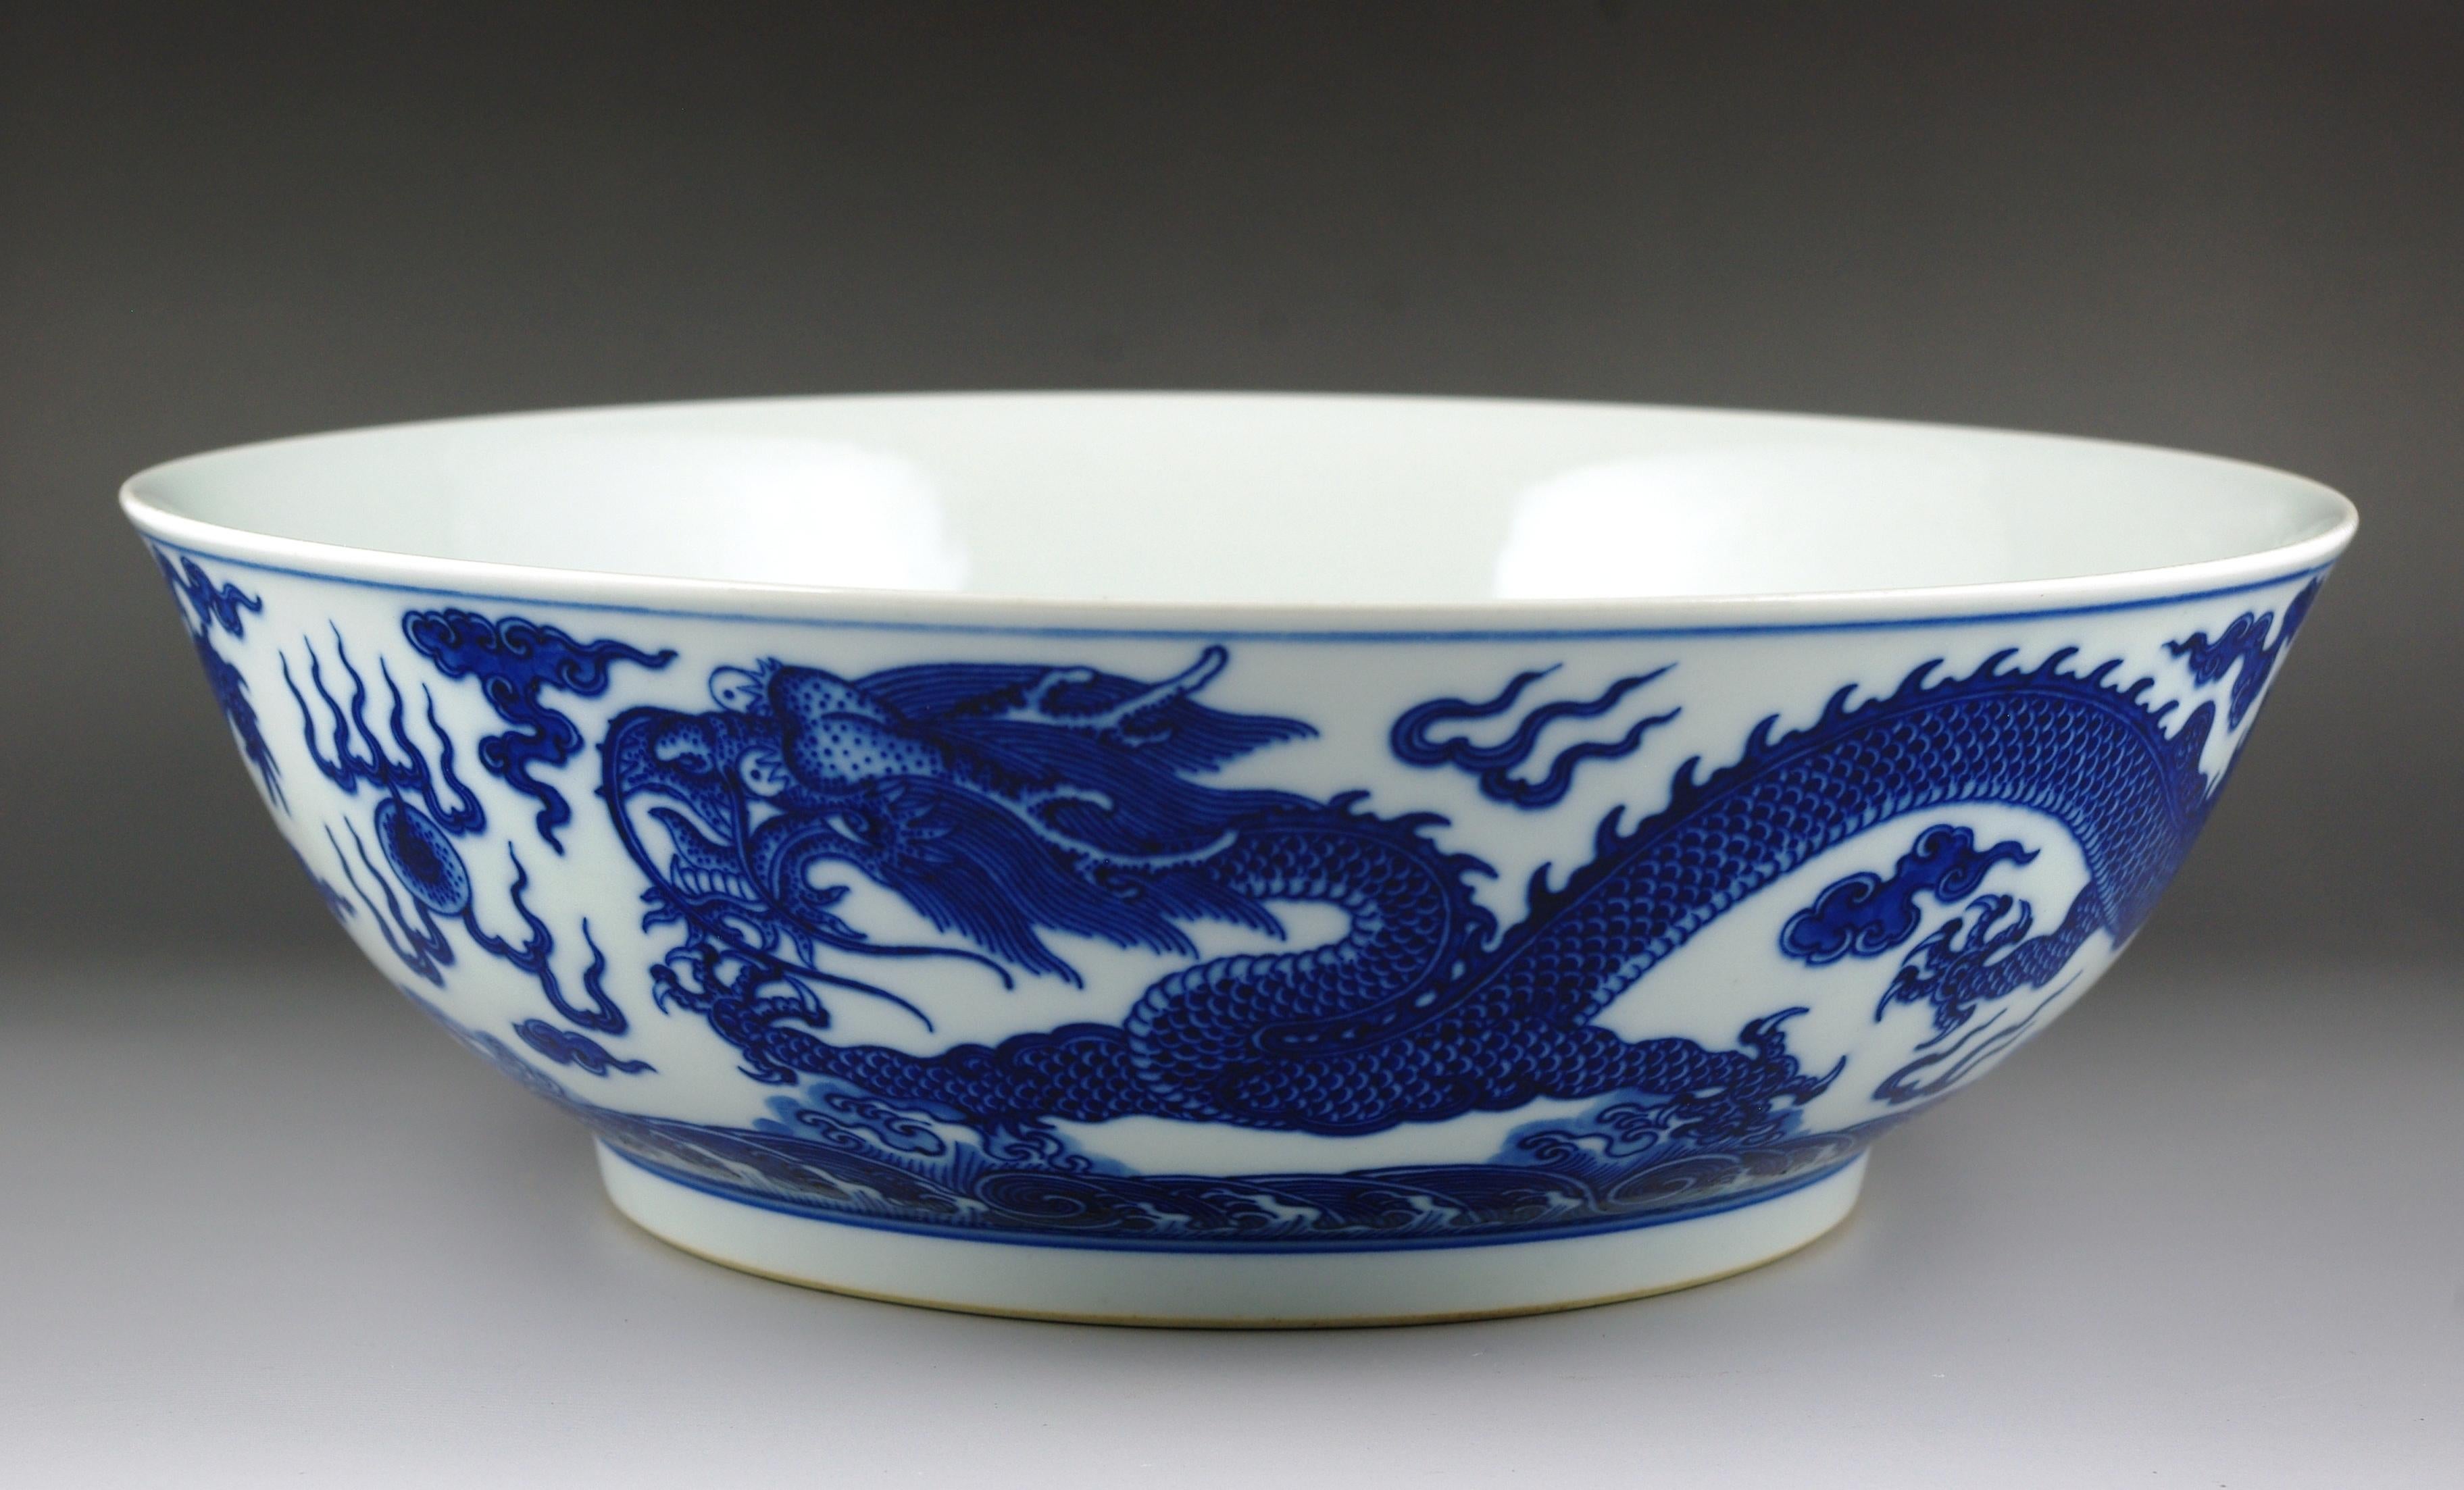 A monumental early 20th-century Chinese porcelain bowl, a magnificent piece that showcases the pinnacle of craftsmanship in the realm of Chinese porcelain artistry. This substantial bowl stands as a testament to the enduring allure and innovation